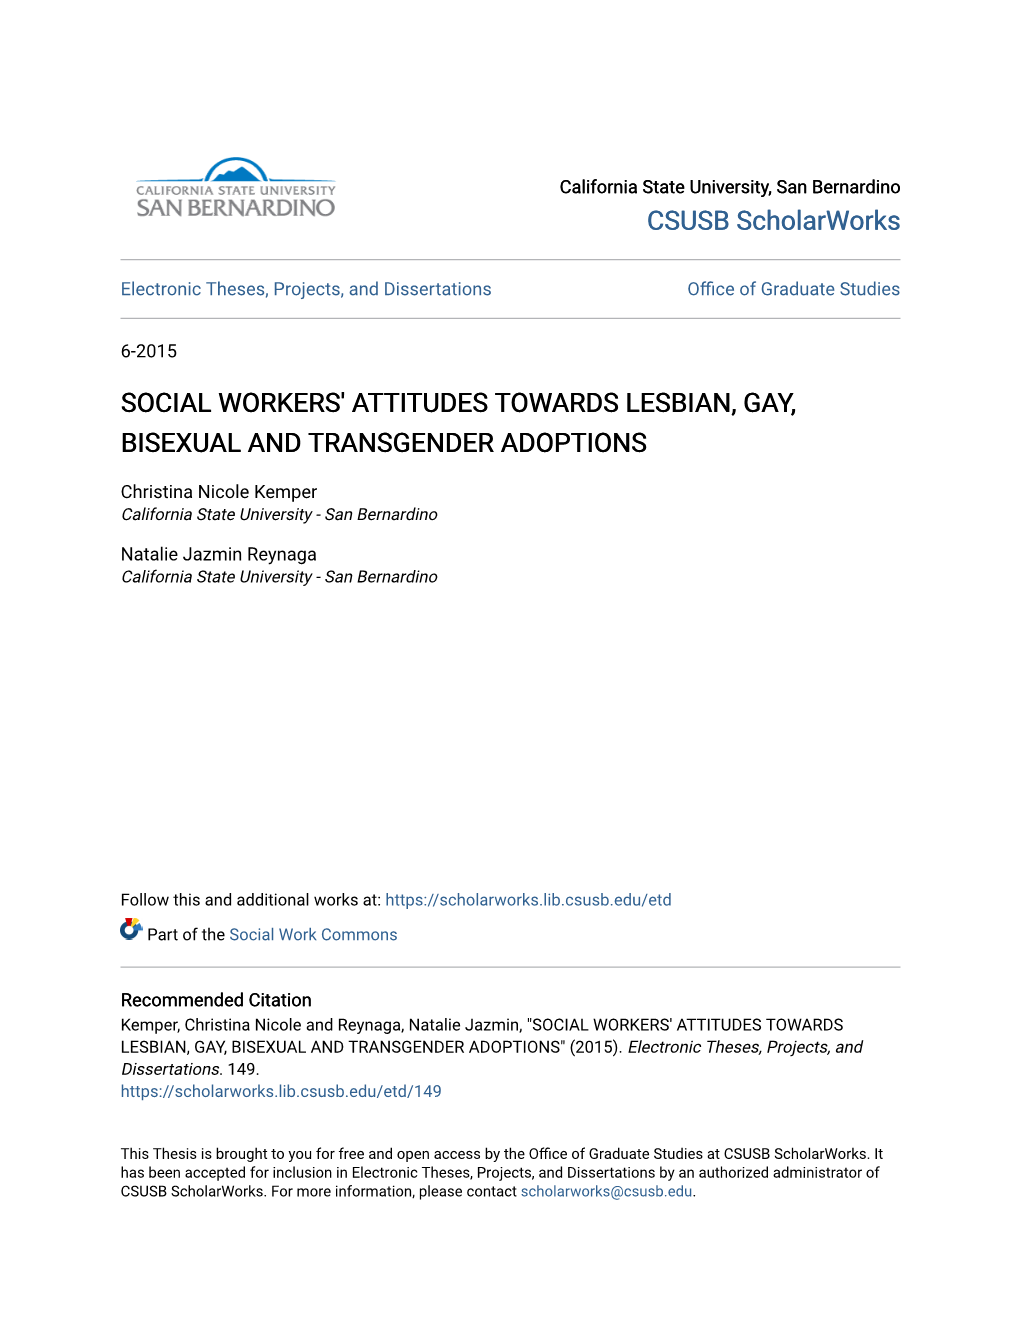 Social Workers' Attitudes Towards Lesbian, Gay, Bisexual and Transgender Adoptions